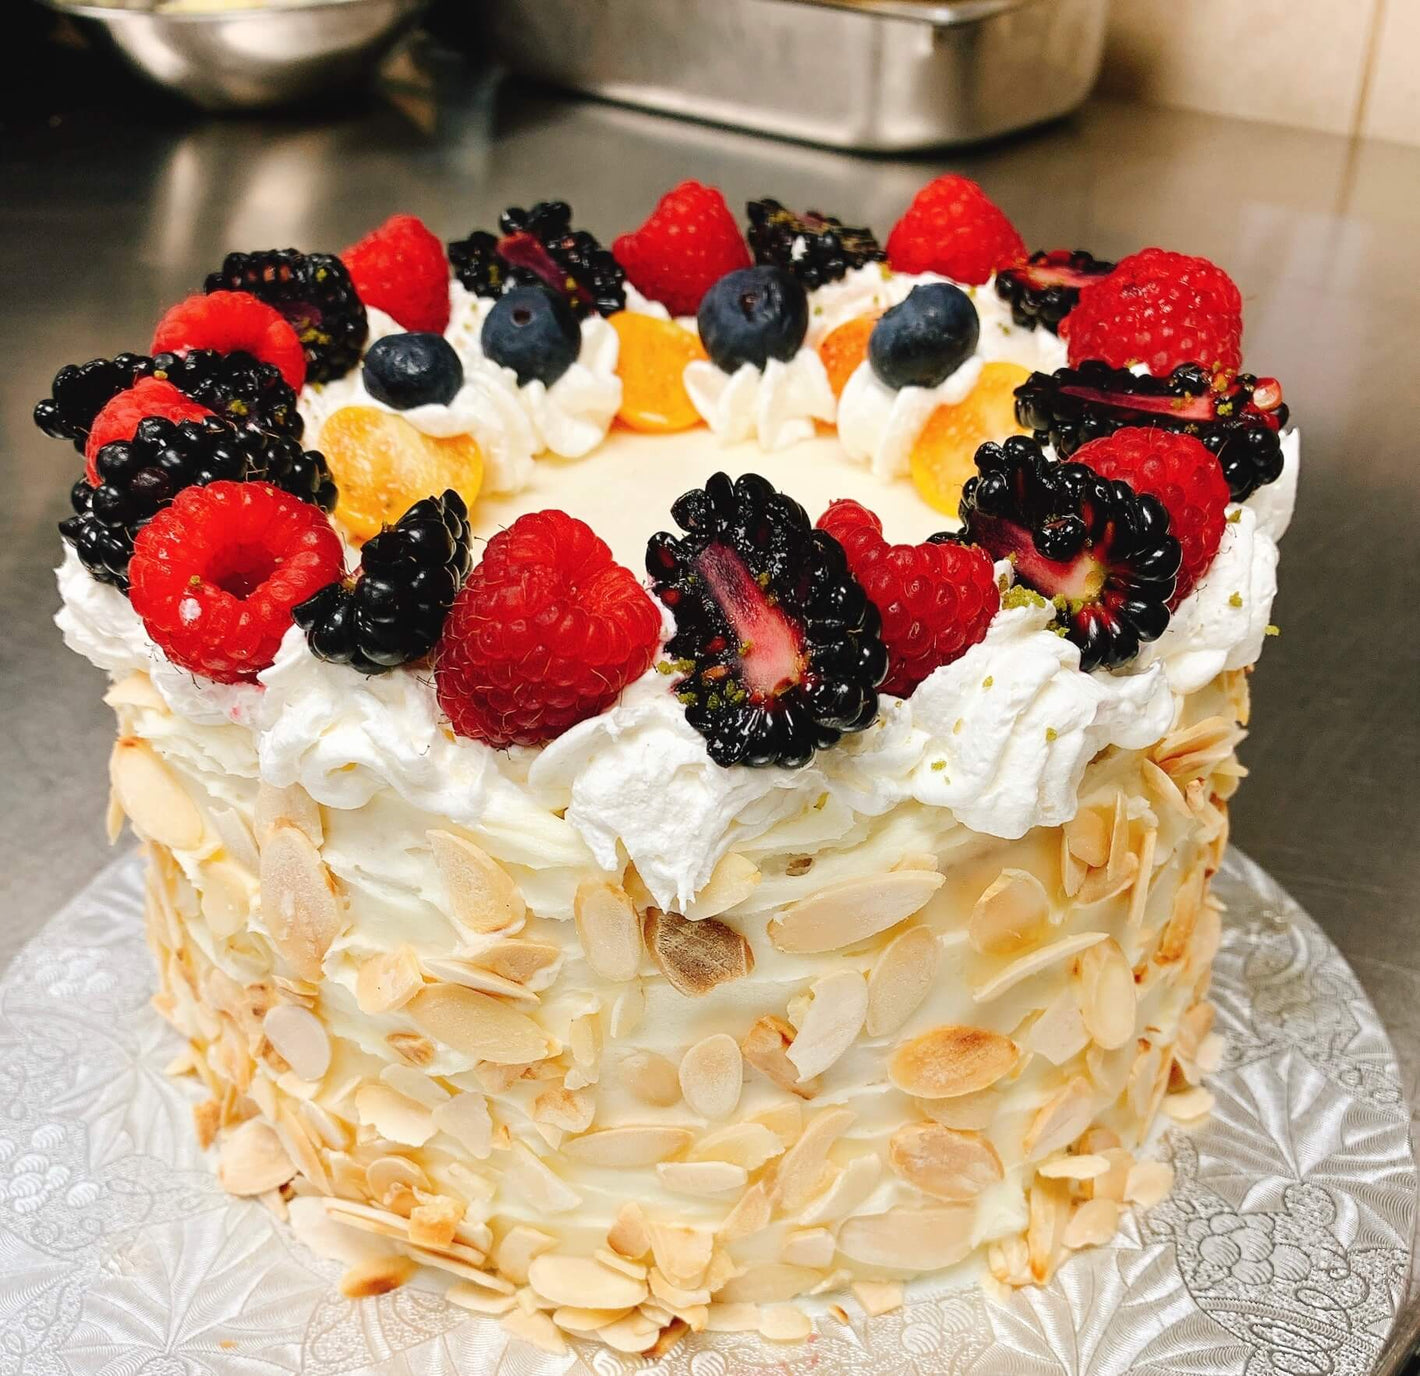 diplomat cake with berries on top